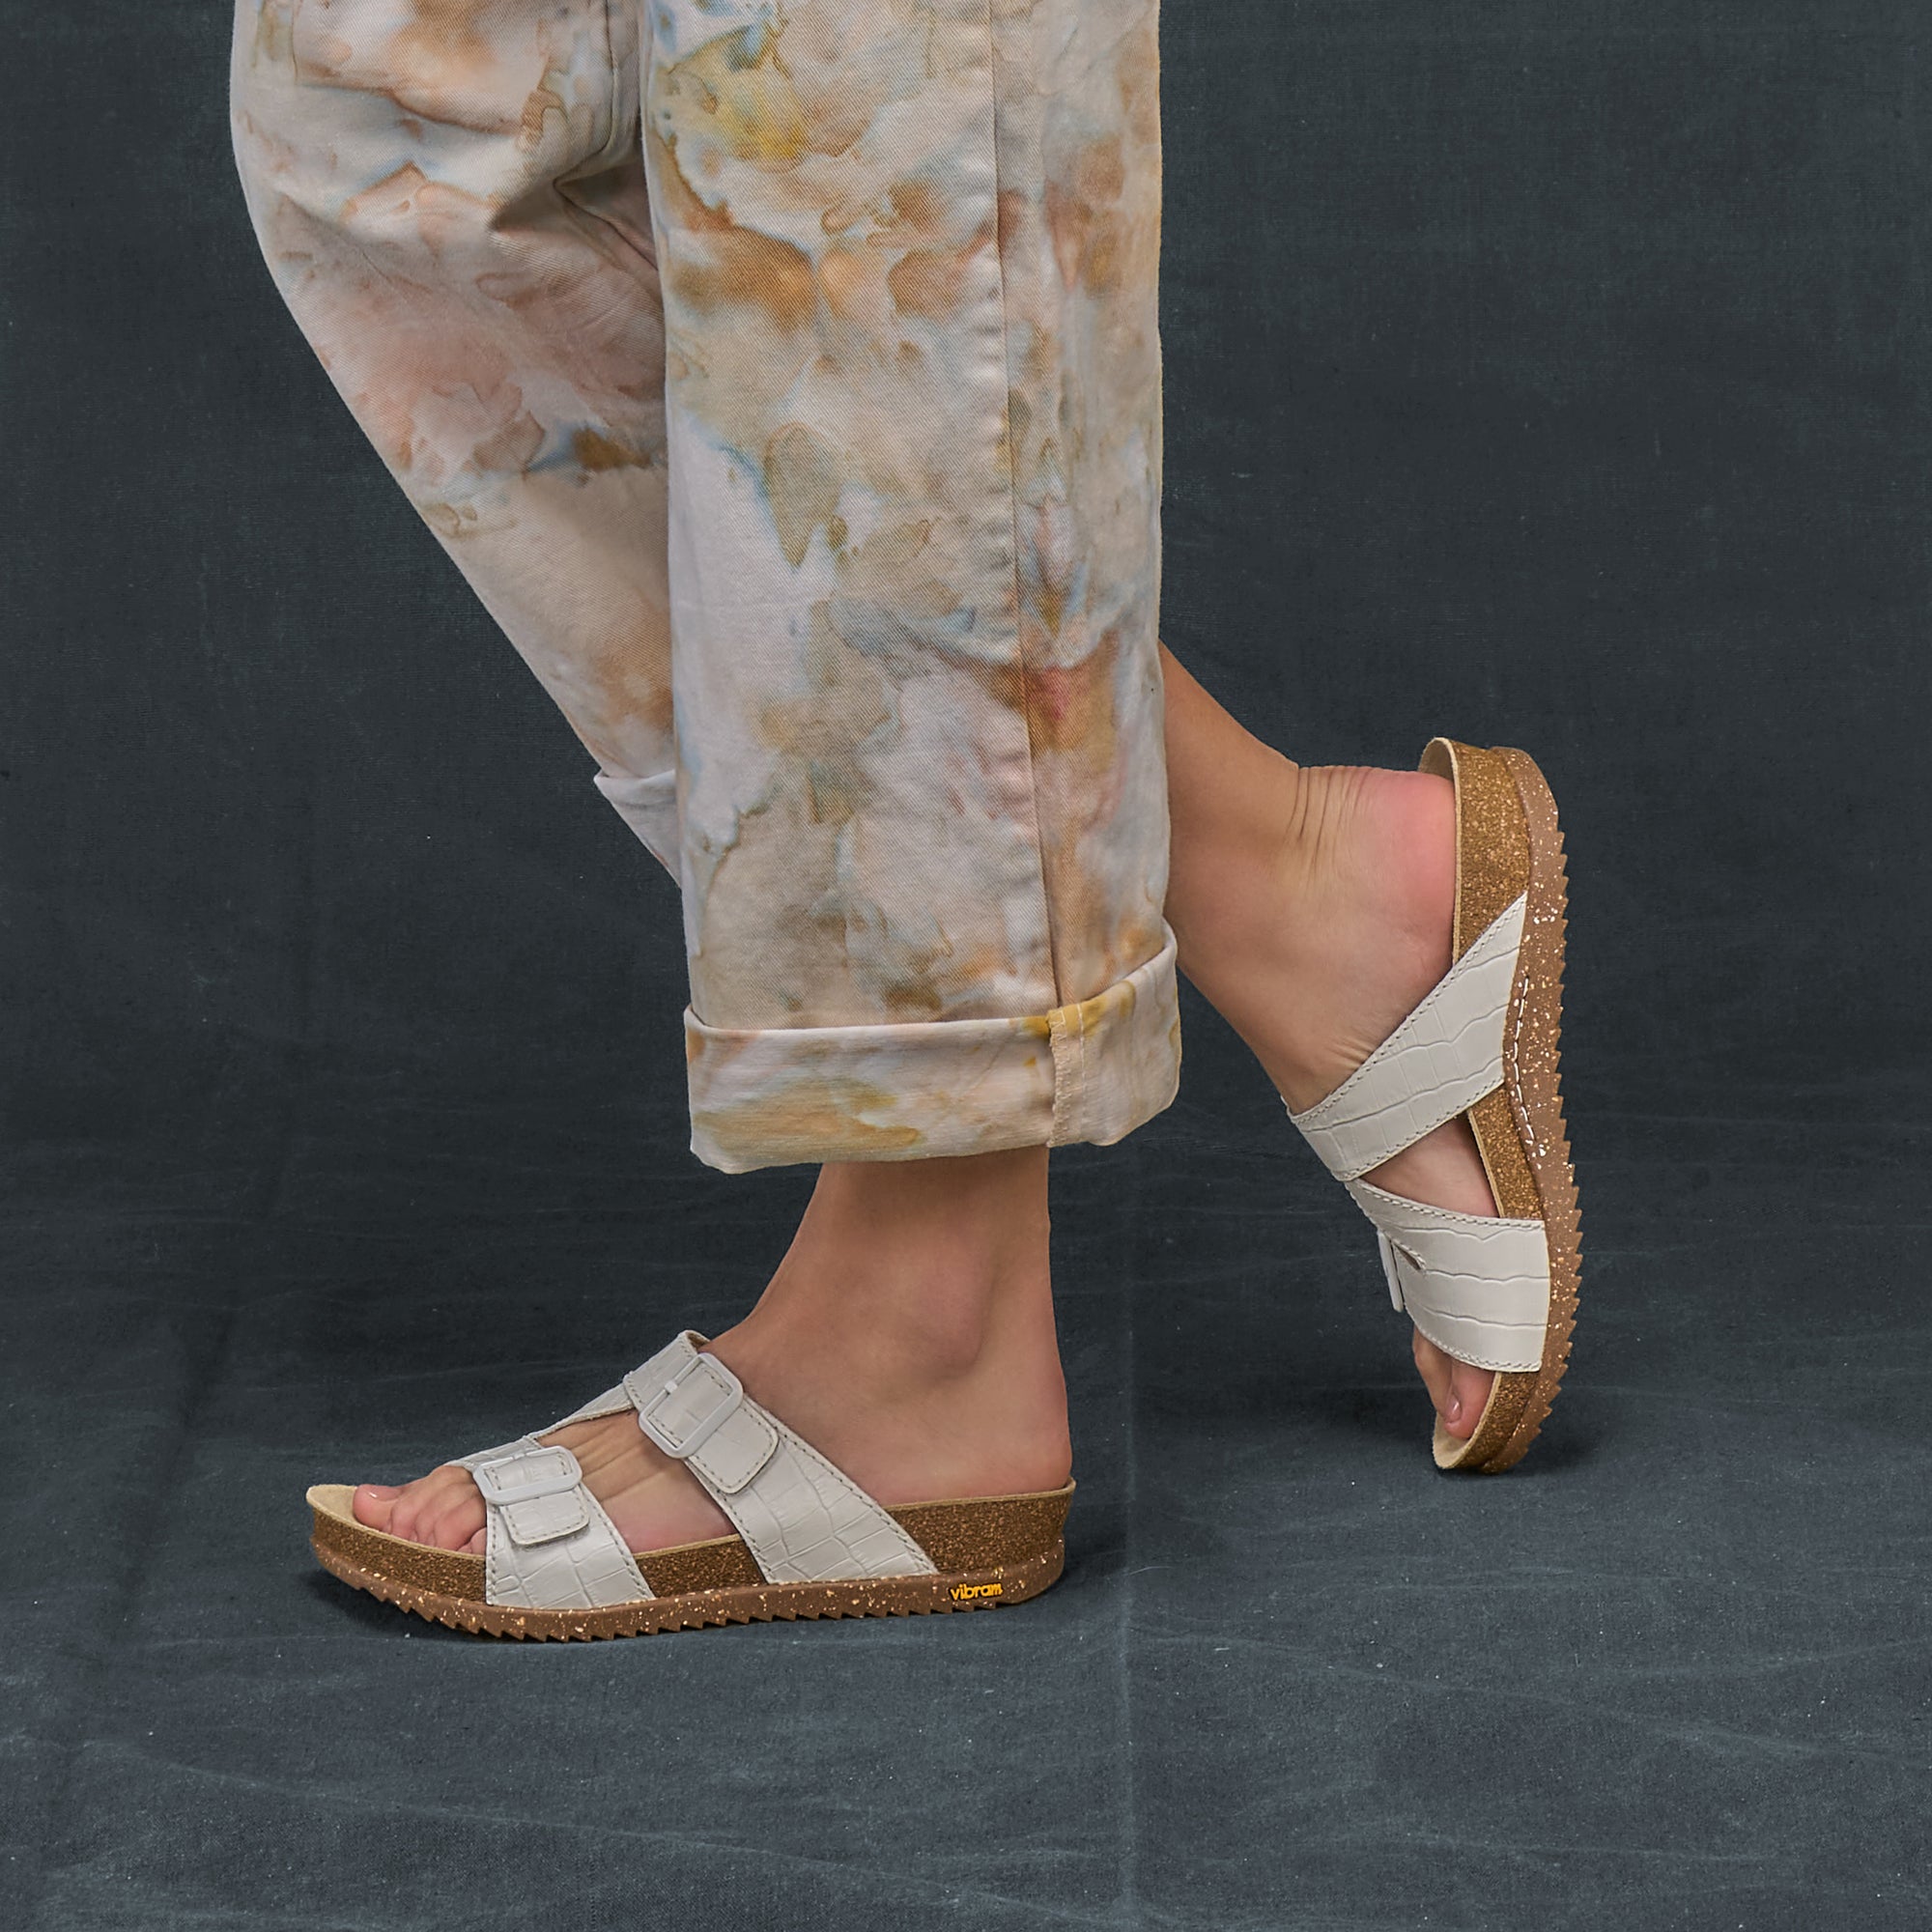 A closeup of cork-footbed sandals with white leather uppers.